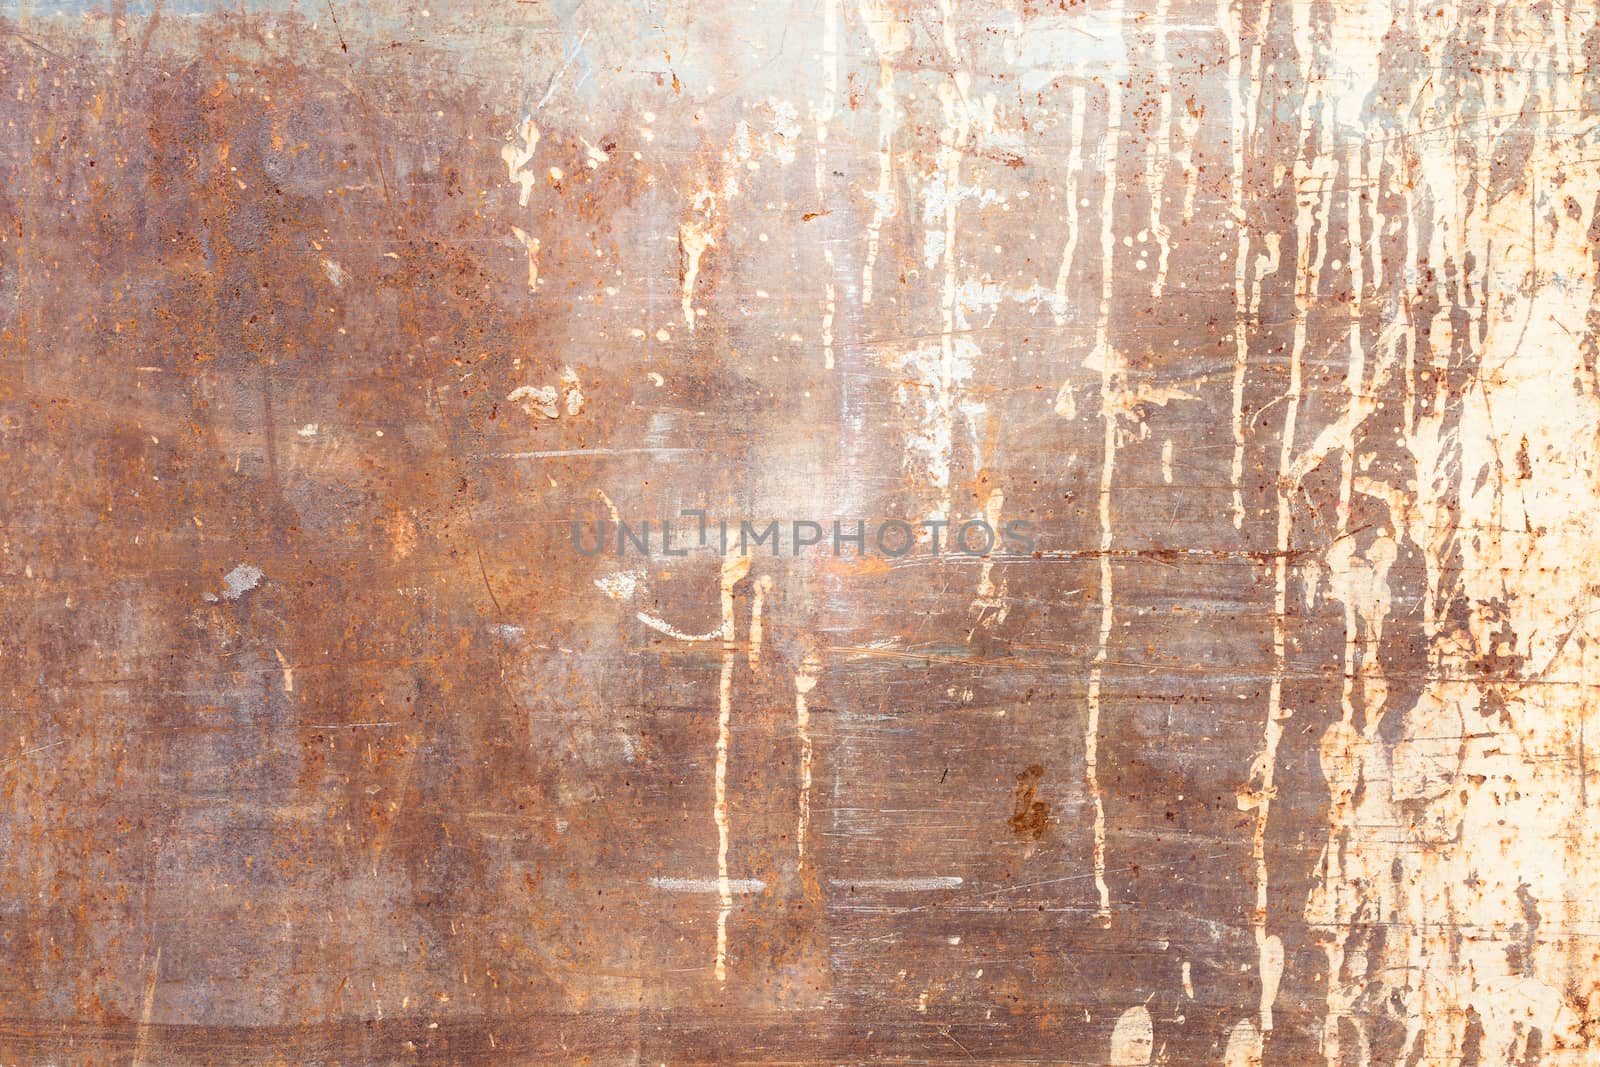 Rusty texture with dripping paint by juhku